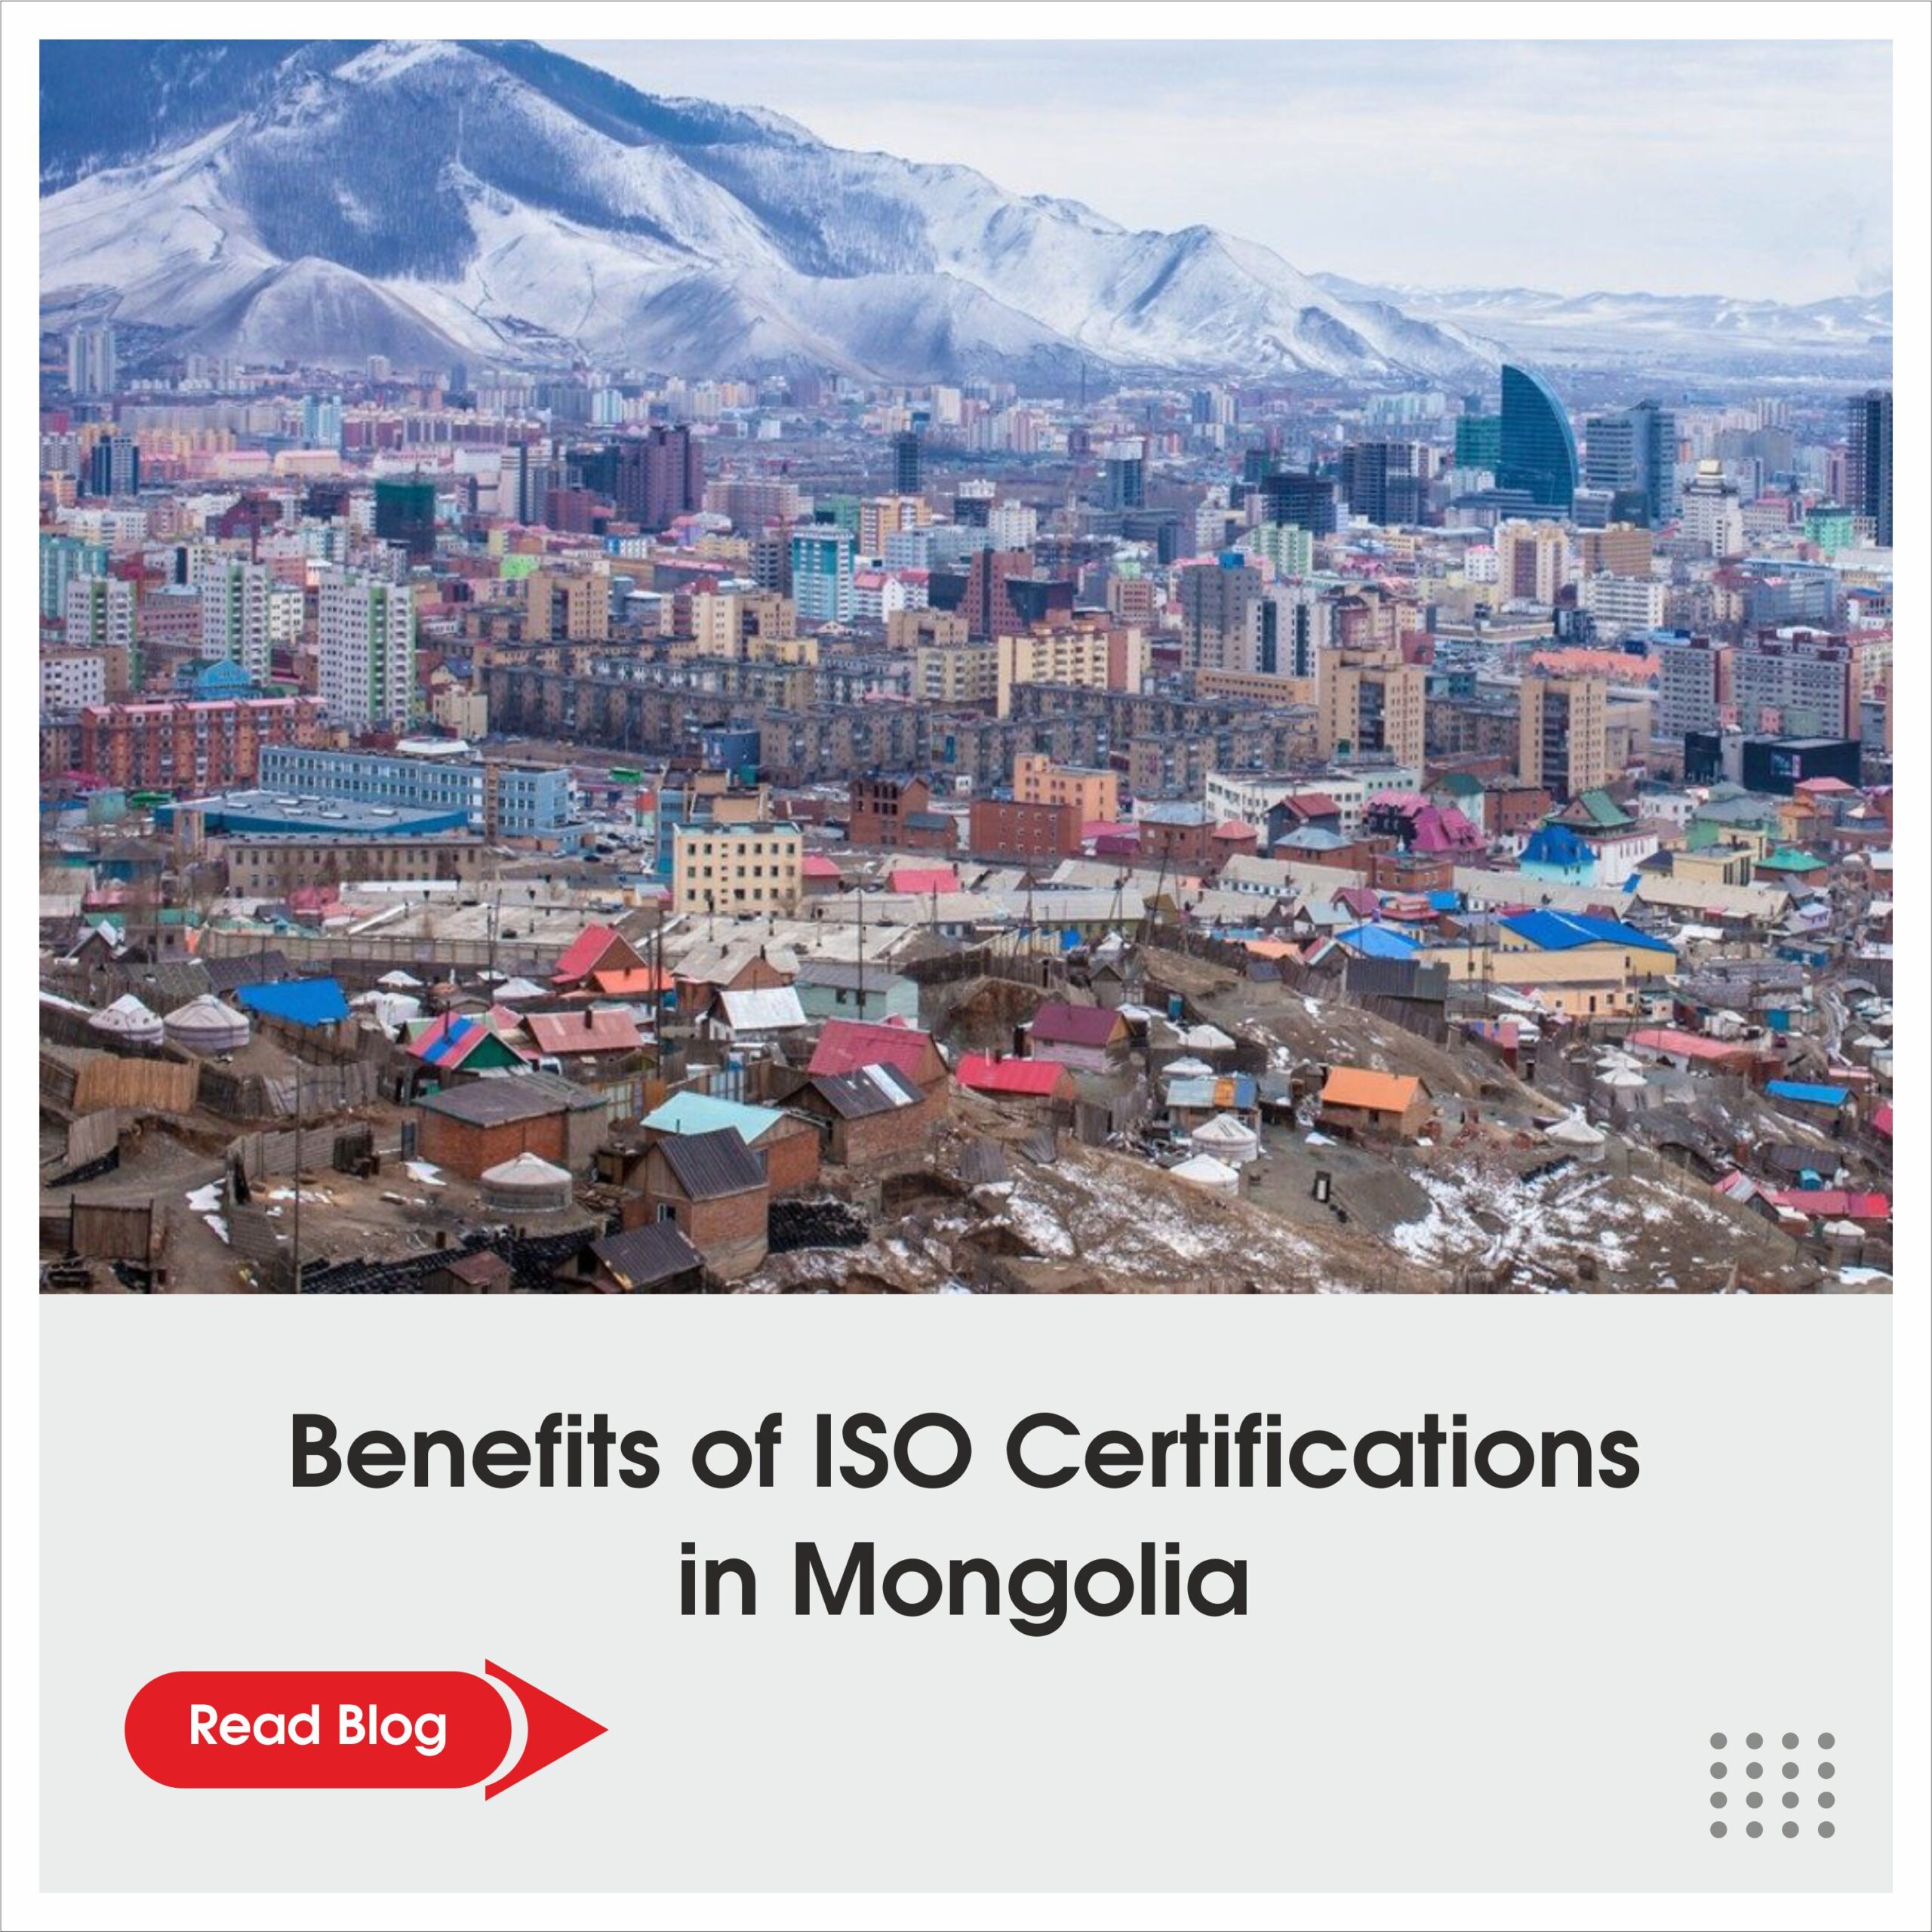 Benefits of ISO Certifications in Mongolia